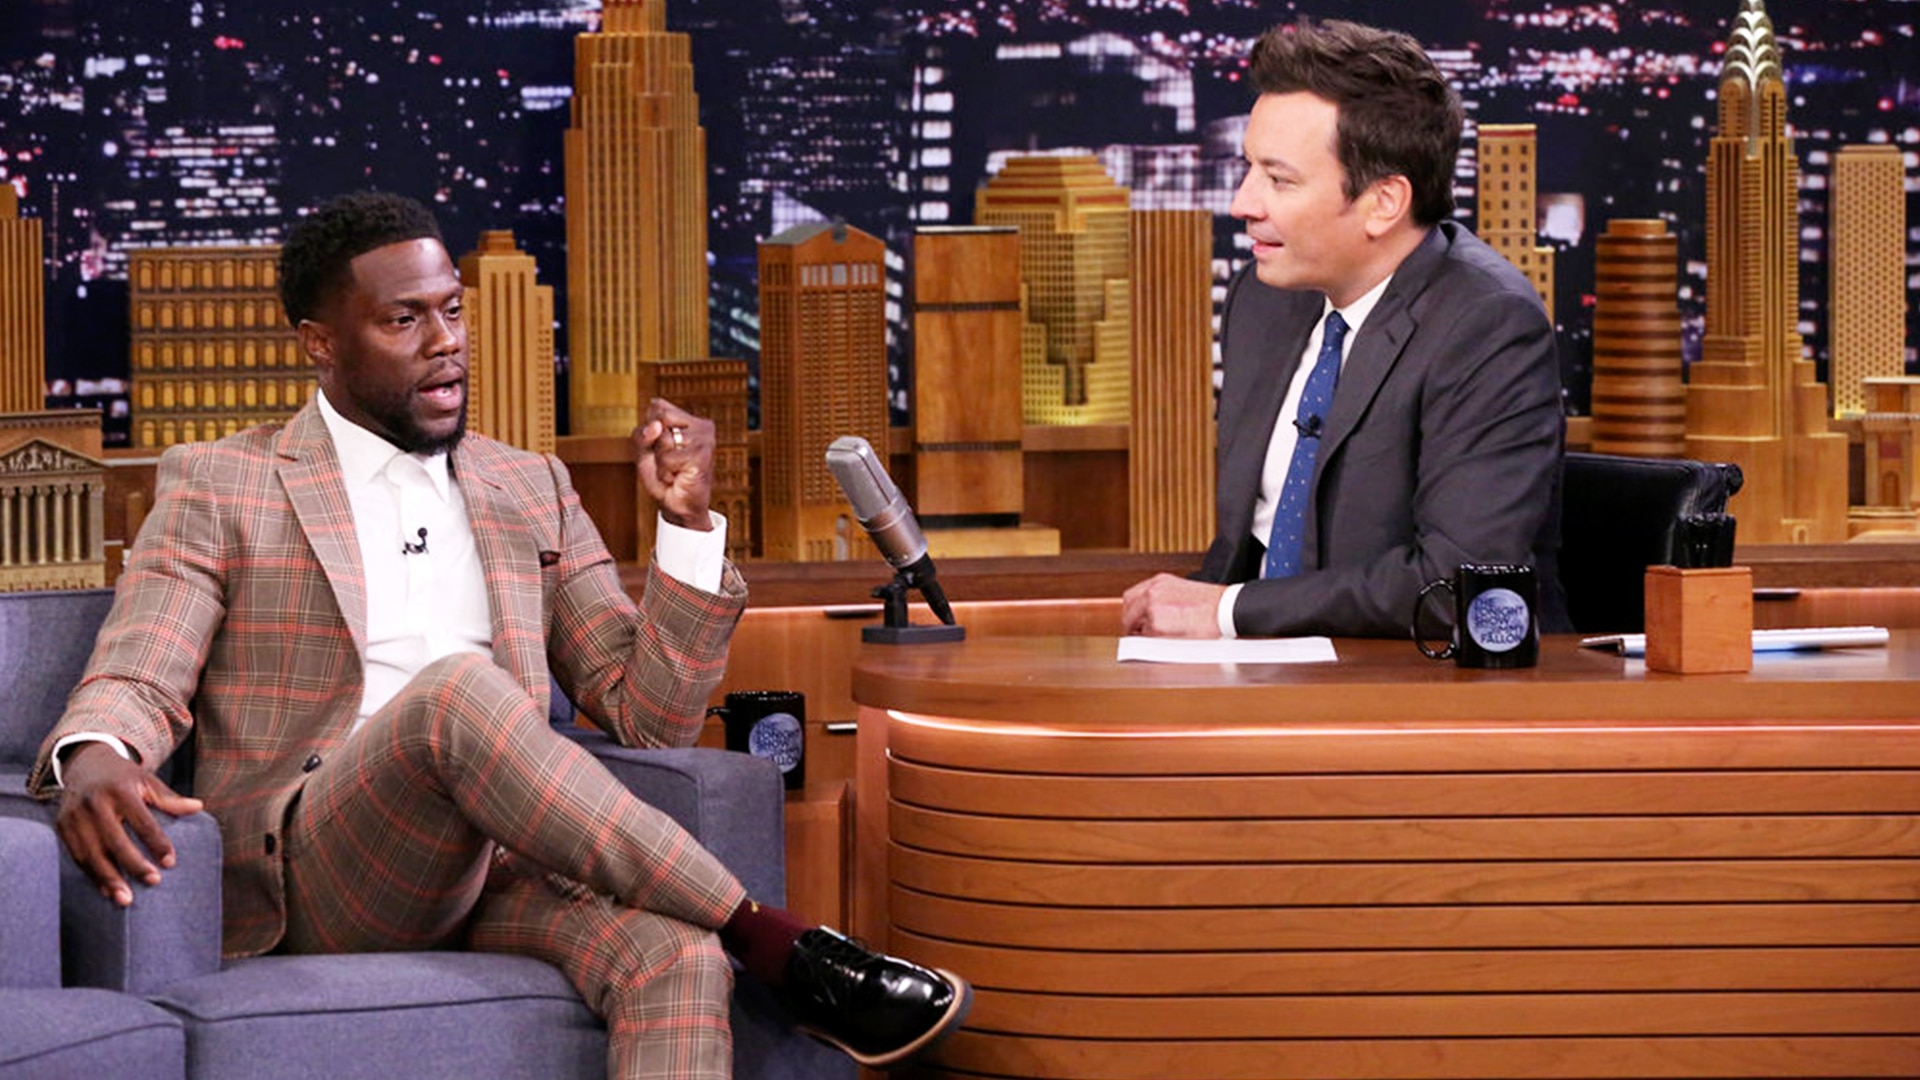 Watch The Tonight Show Starring Jimmy Fallon Episode: Kevin Hart (co